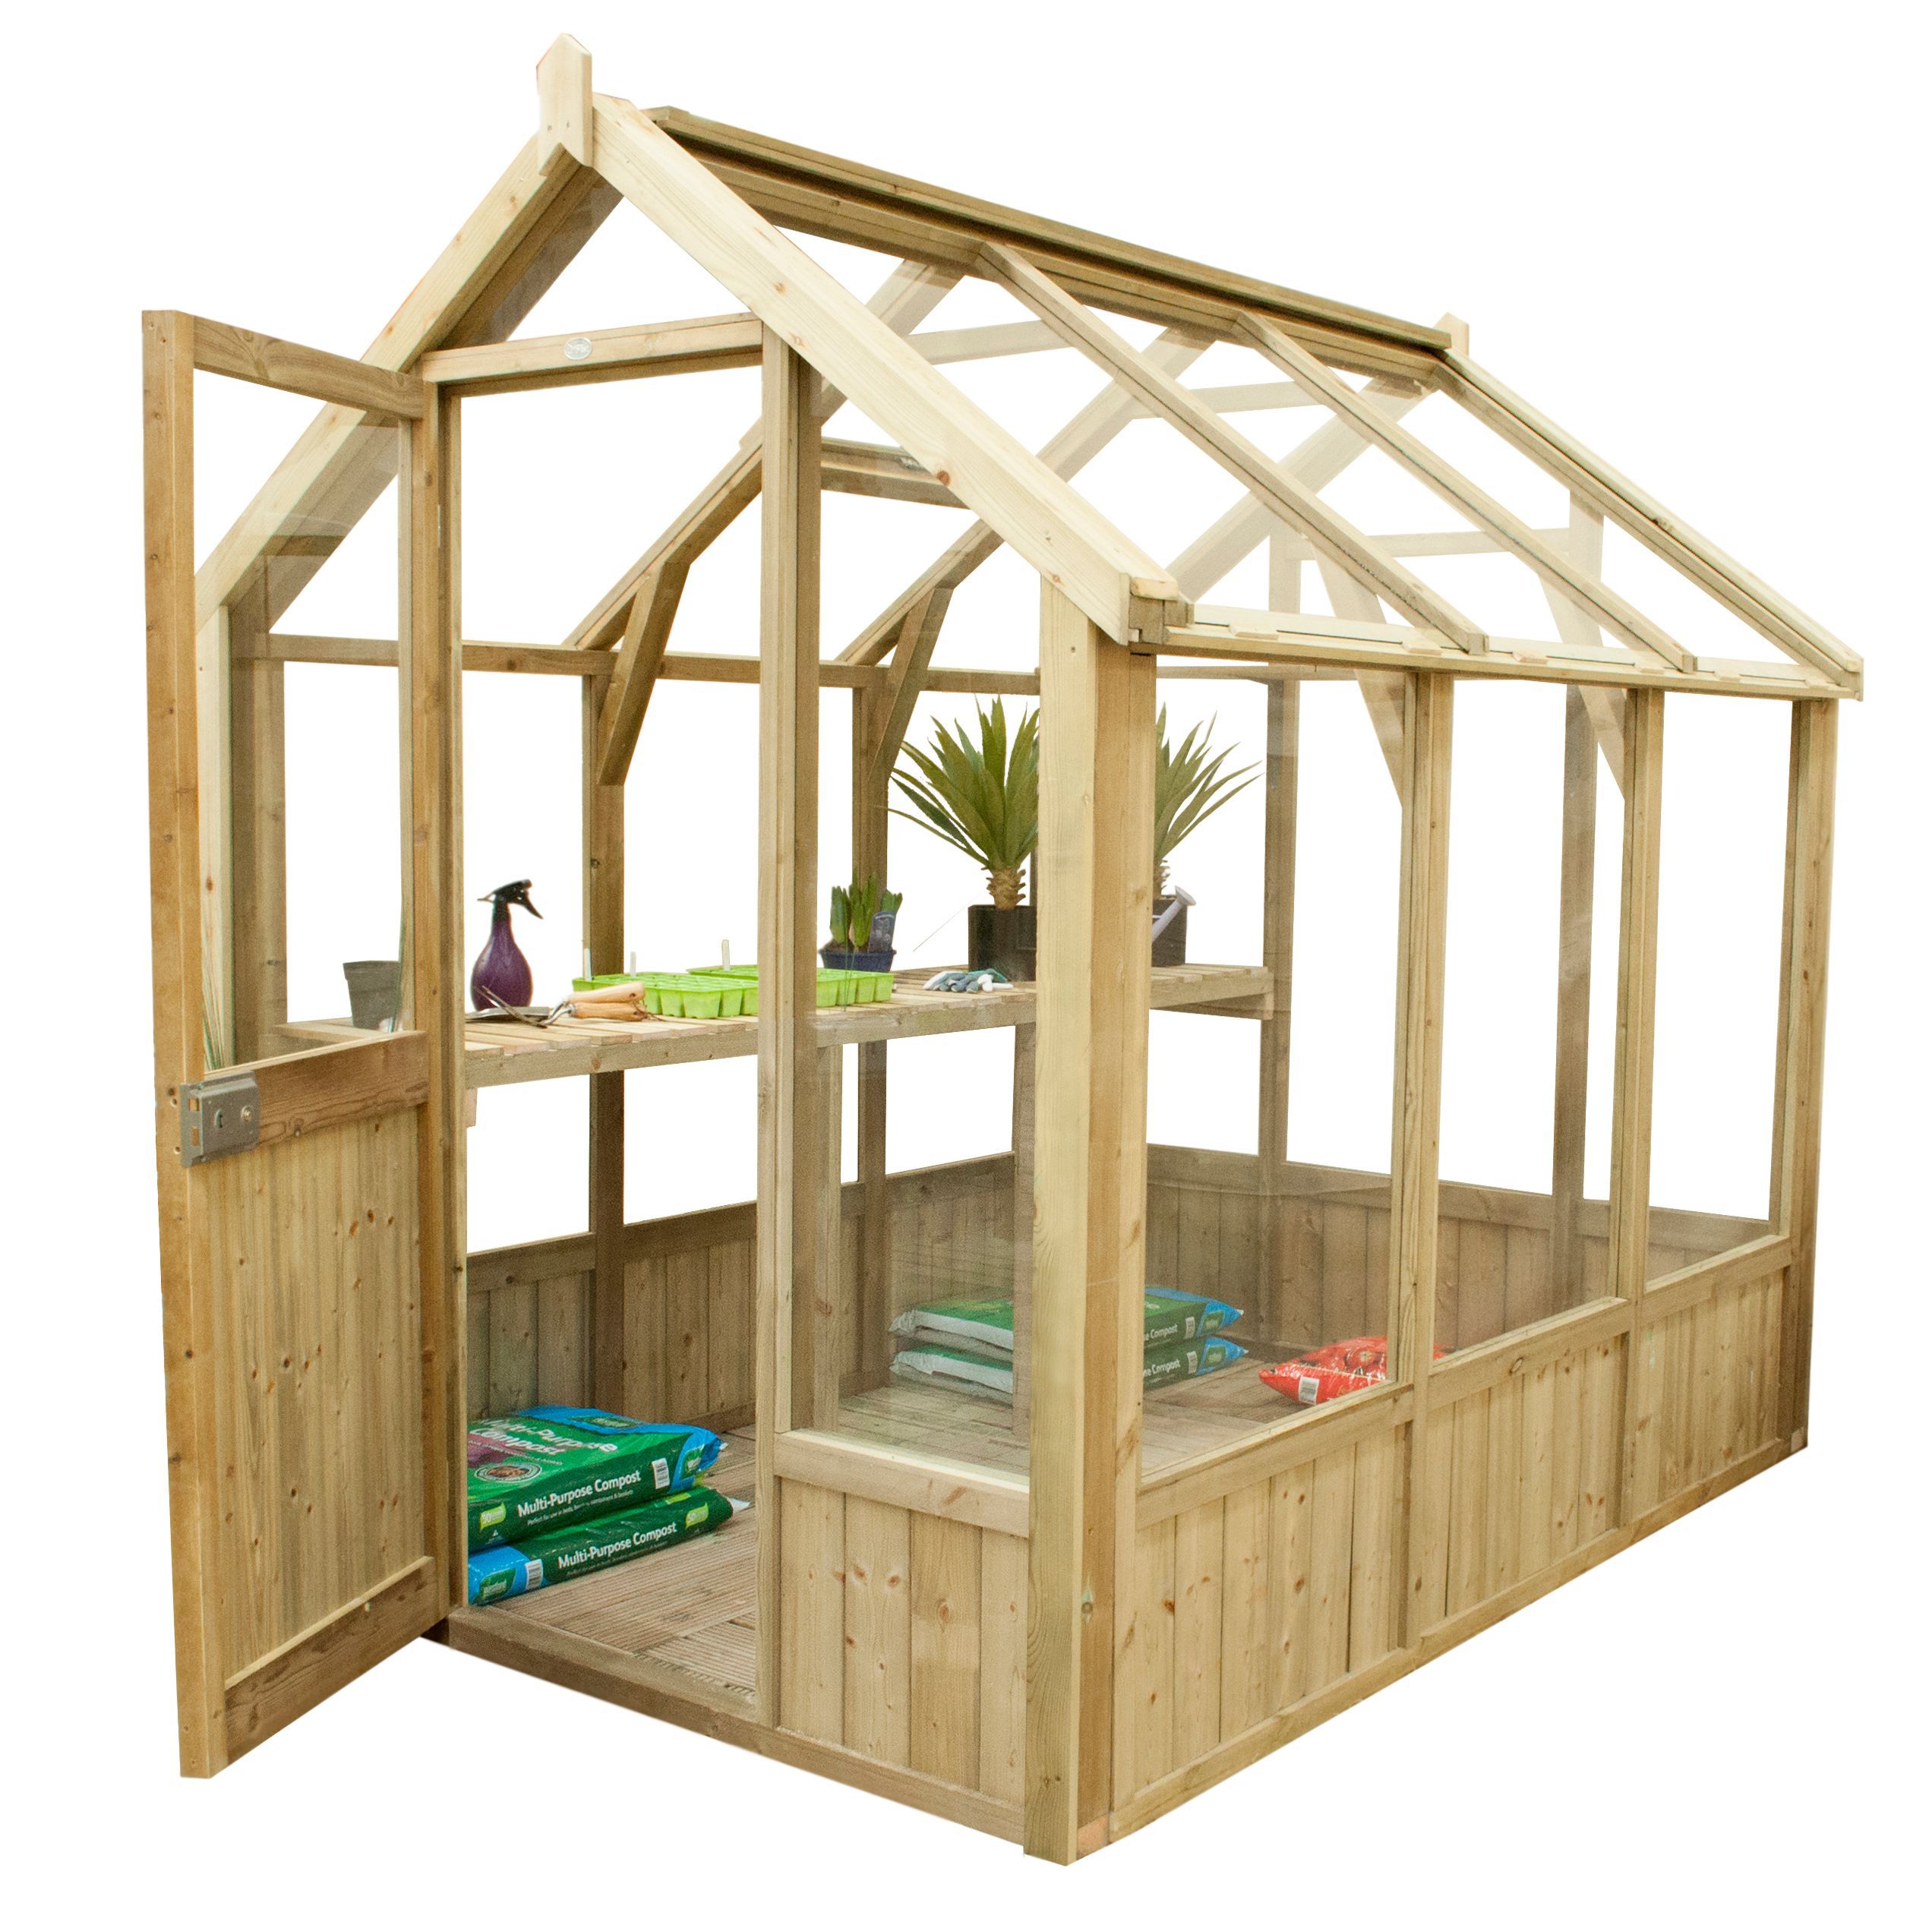 Forest Garden Vale Natural timber 8x6 Greenhouse